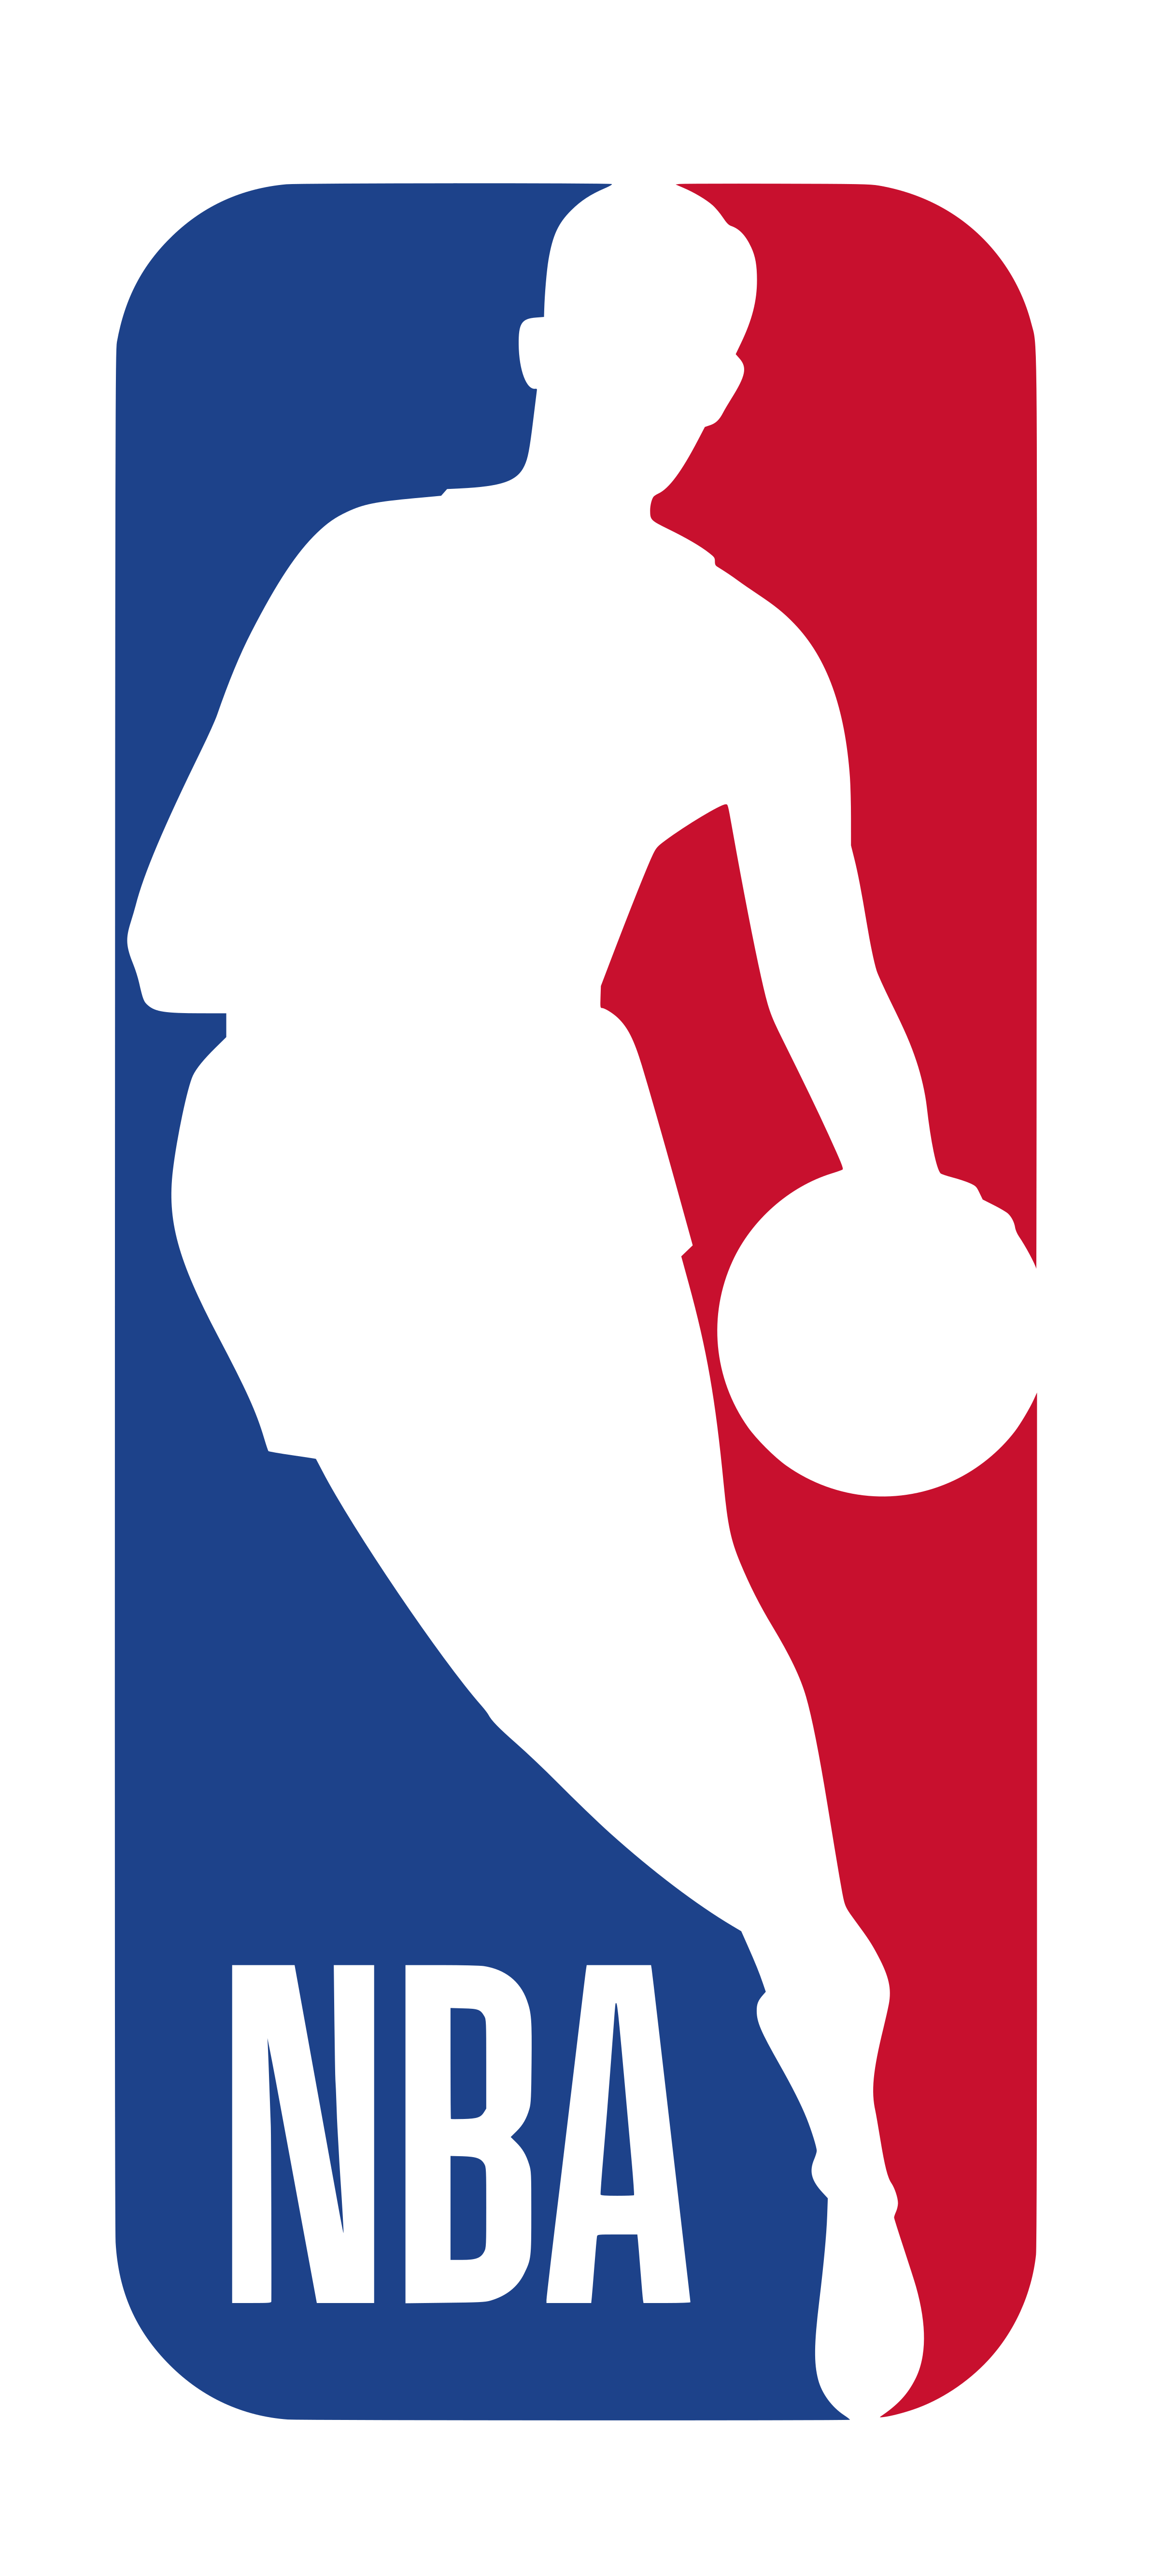 Red White and Black Basketball Logo - Basketball png download in a row